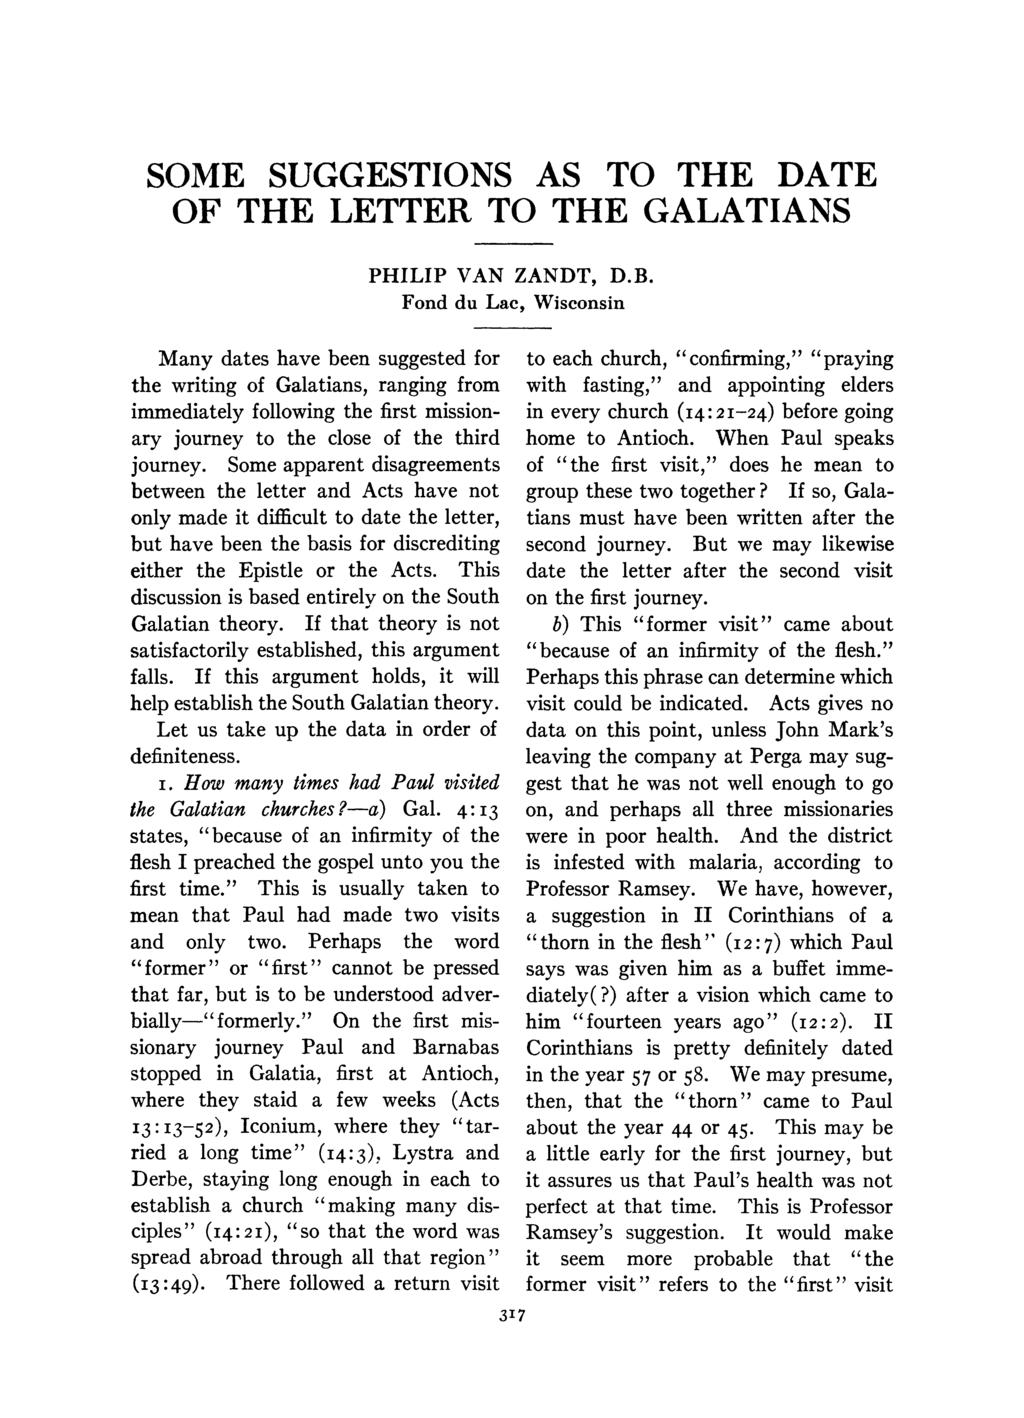 SOME SUGGESTIONS AS TO THE DATE OF THE LETTER TO THE GALATIANS PHILIP VAN ZANDT, D.B.